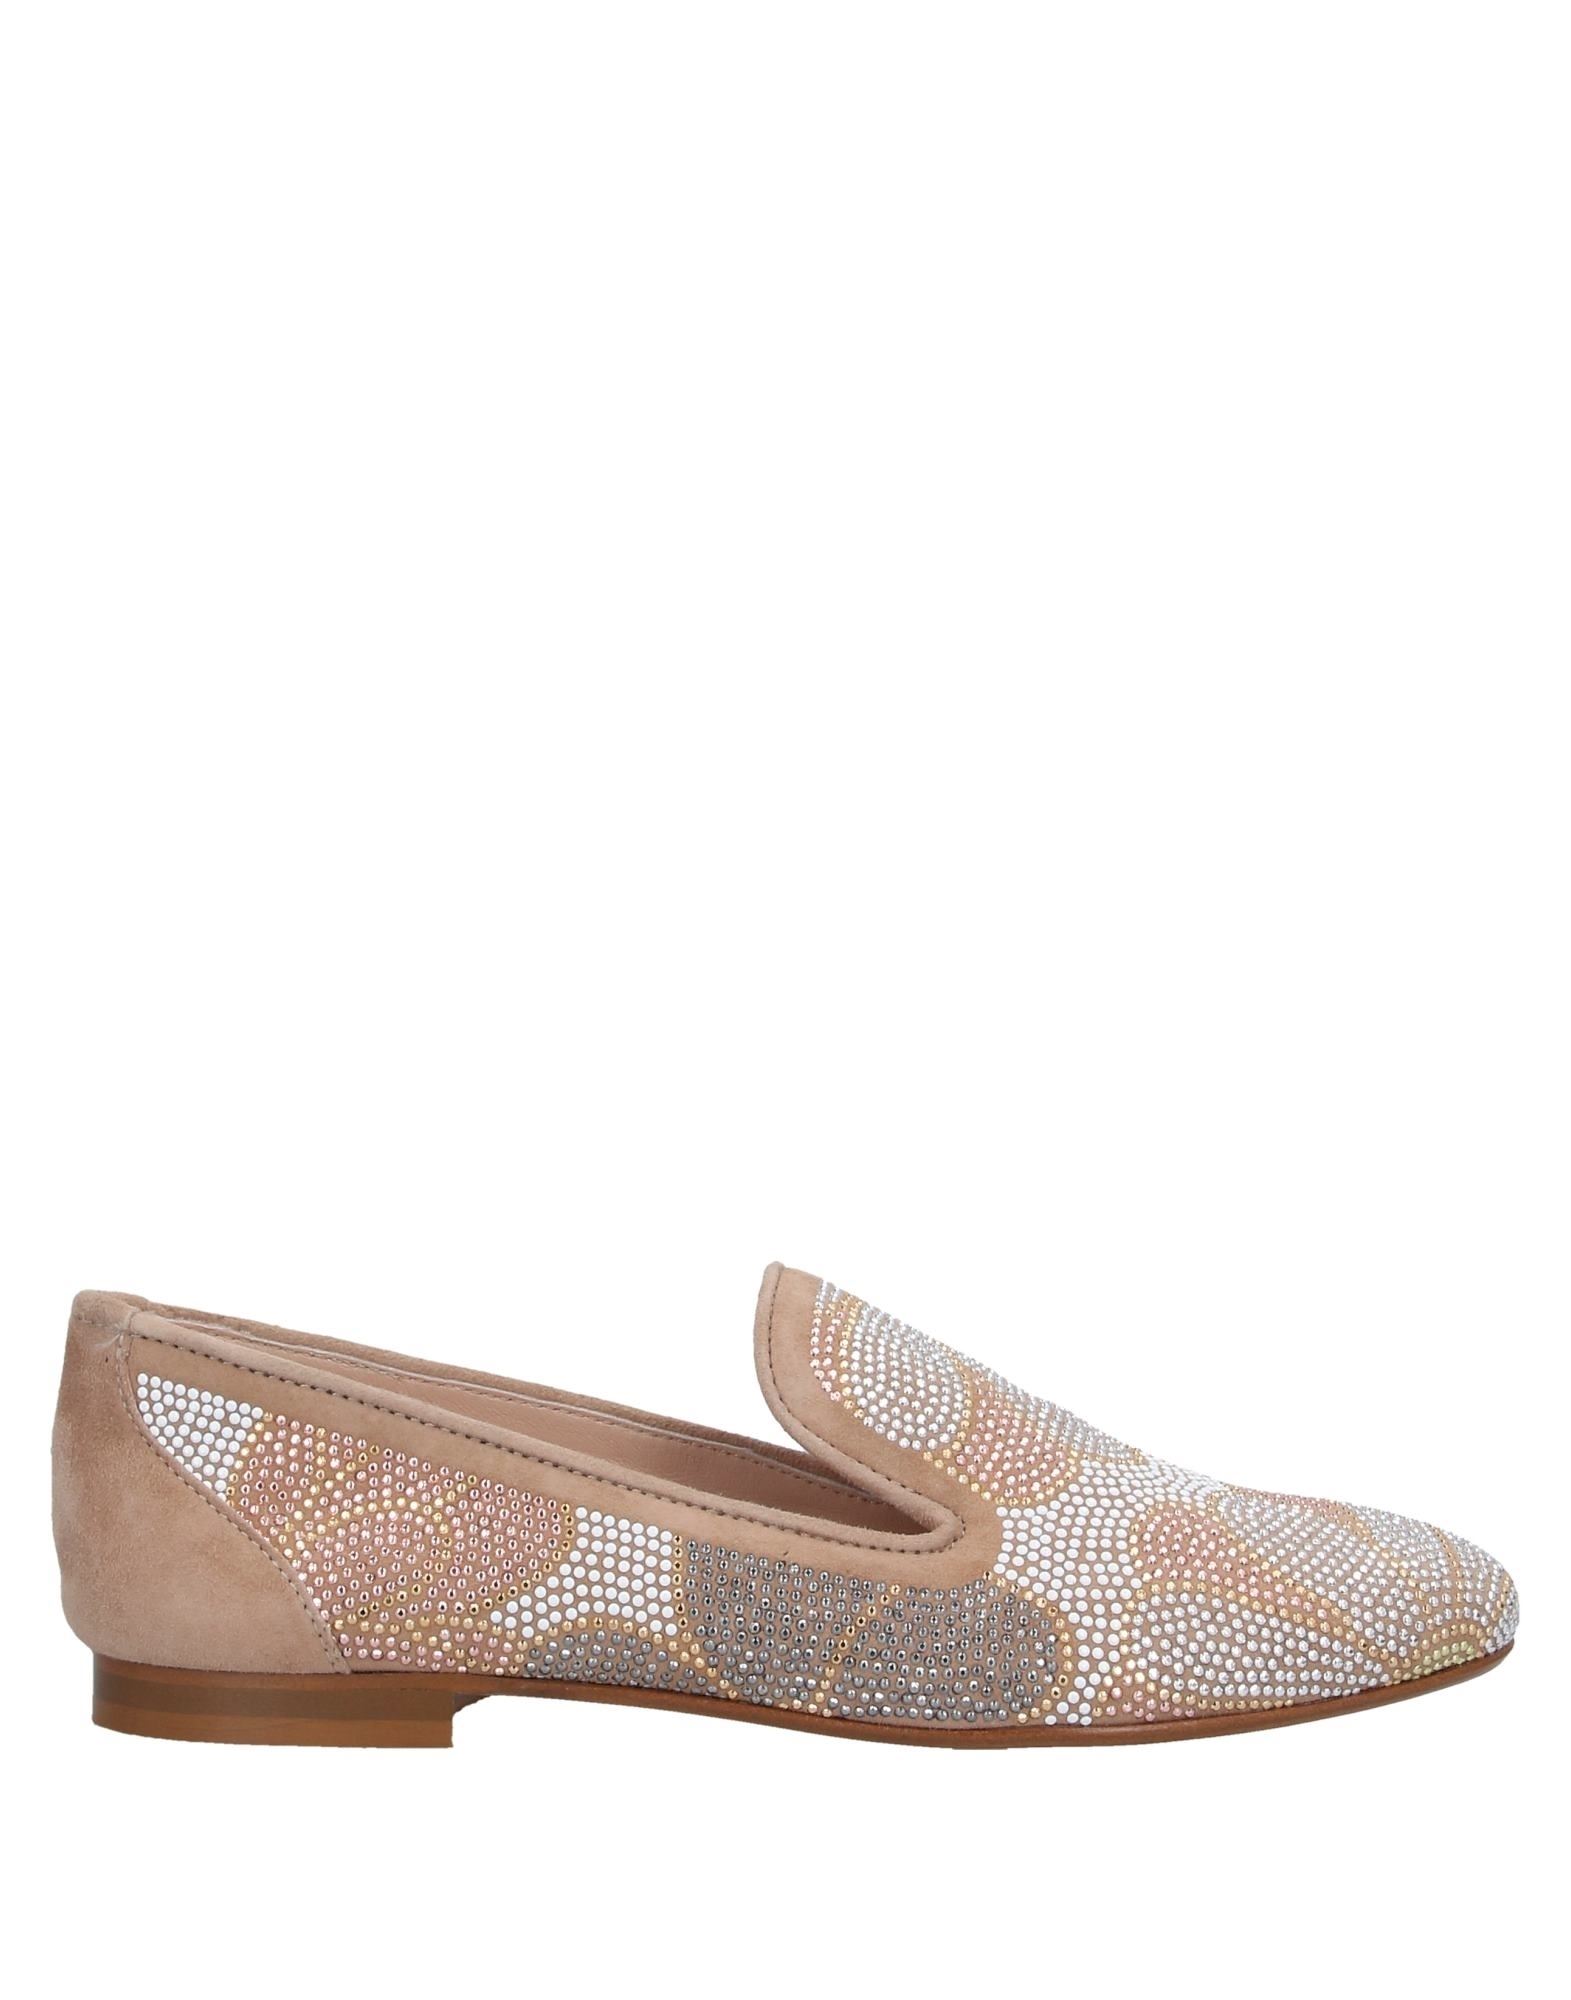 BELLE VIE Loafers